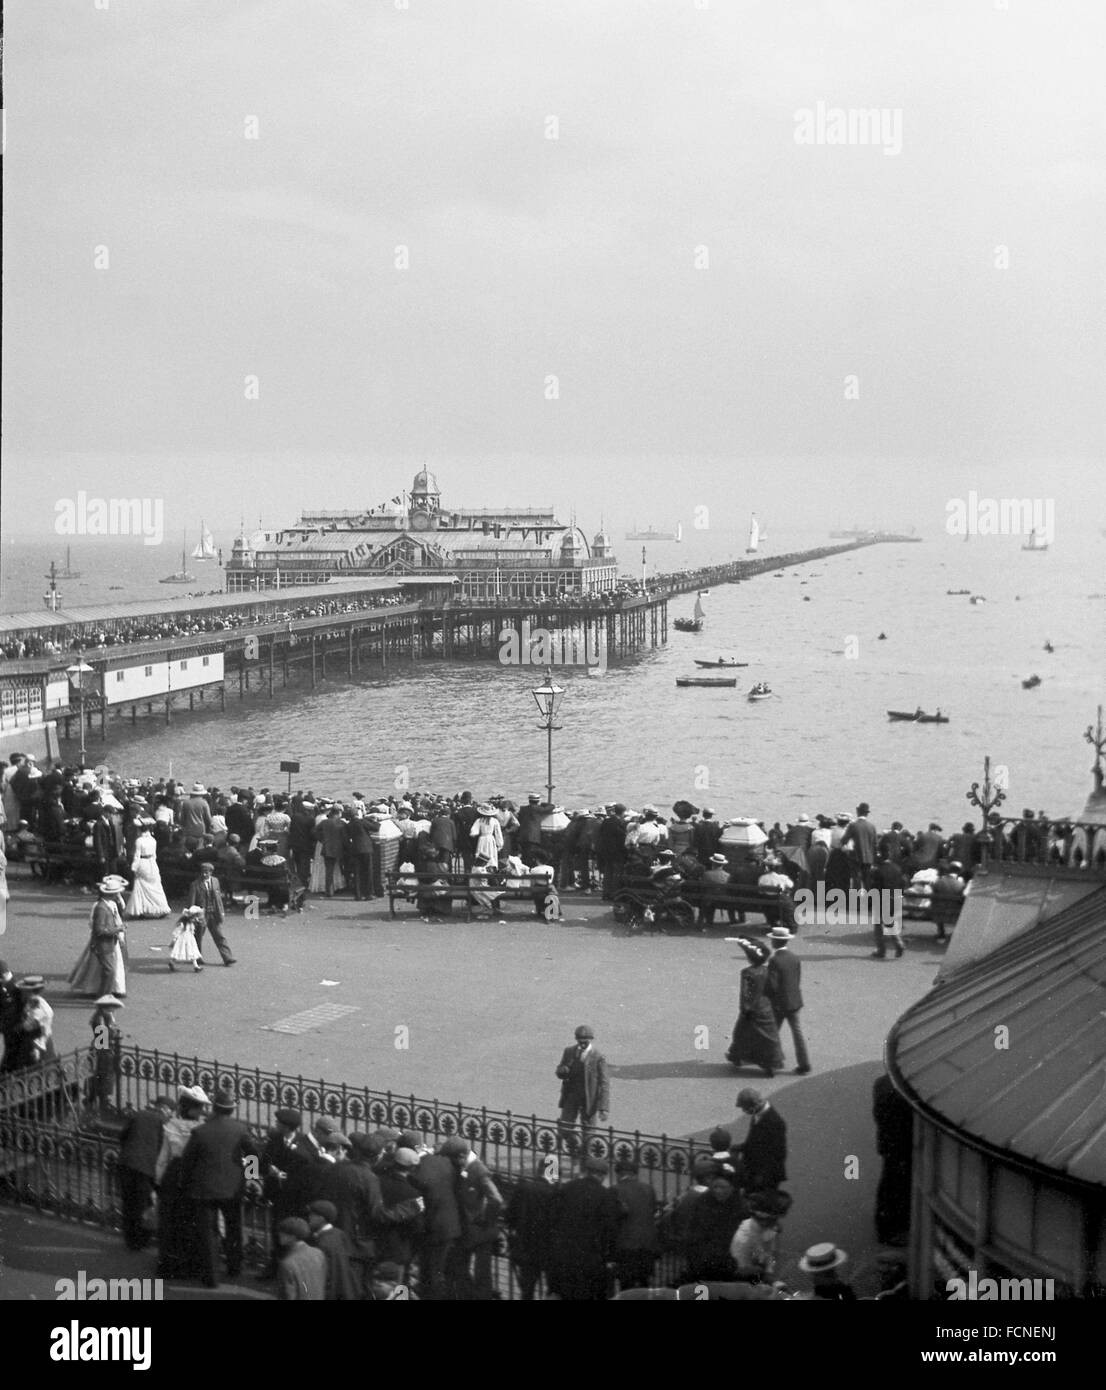 AJAXNETPHOTO. EARLY 1900S (APPROX). SOUTHEND, ENGLAND. - WORLD'S LONGEST PIER - PEOPLE IN EDWARDIAN DRESS CROWDING THE SEAFRONT AND PLEASURE PIER ON AN EARLY AUGUST HOLIDAY. A SEEBOLD BENEFIT WAS SCHEDULED FOR AUGUST 3 (POSSIBLY 1902) IN THE PIER PAVILLION. PHOTO:AJAX VINTAGE PICTURE LIBRARY  REF:AVL SOUTHEND 1900 2 Stock Photo